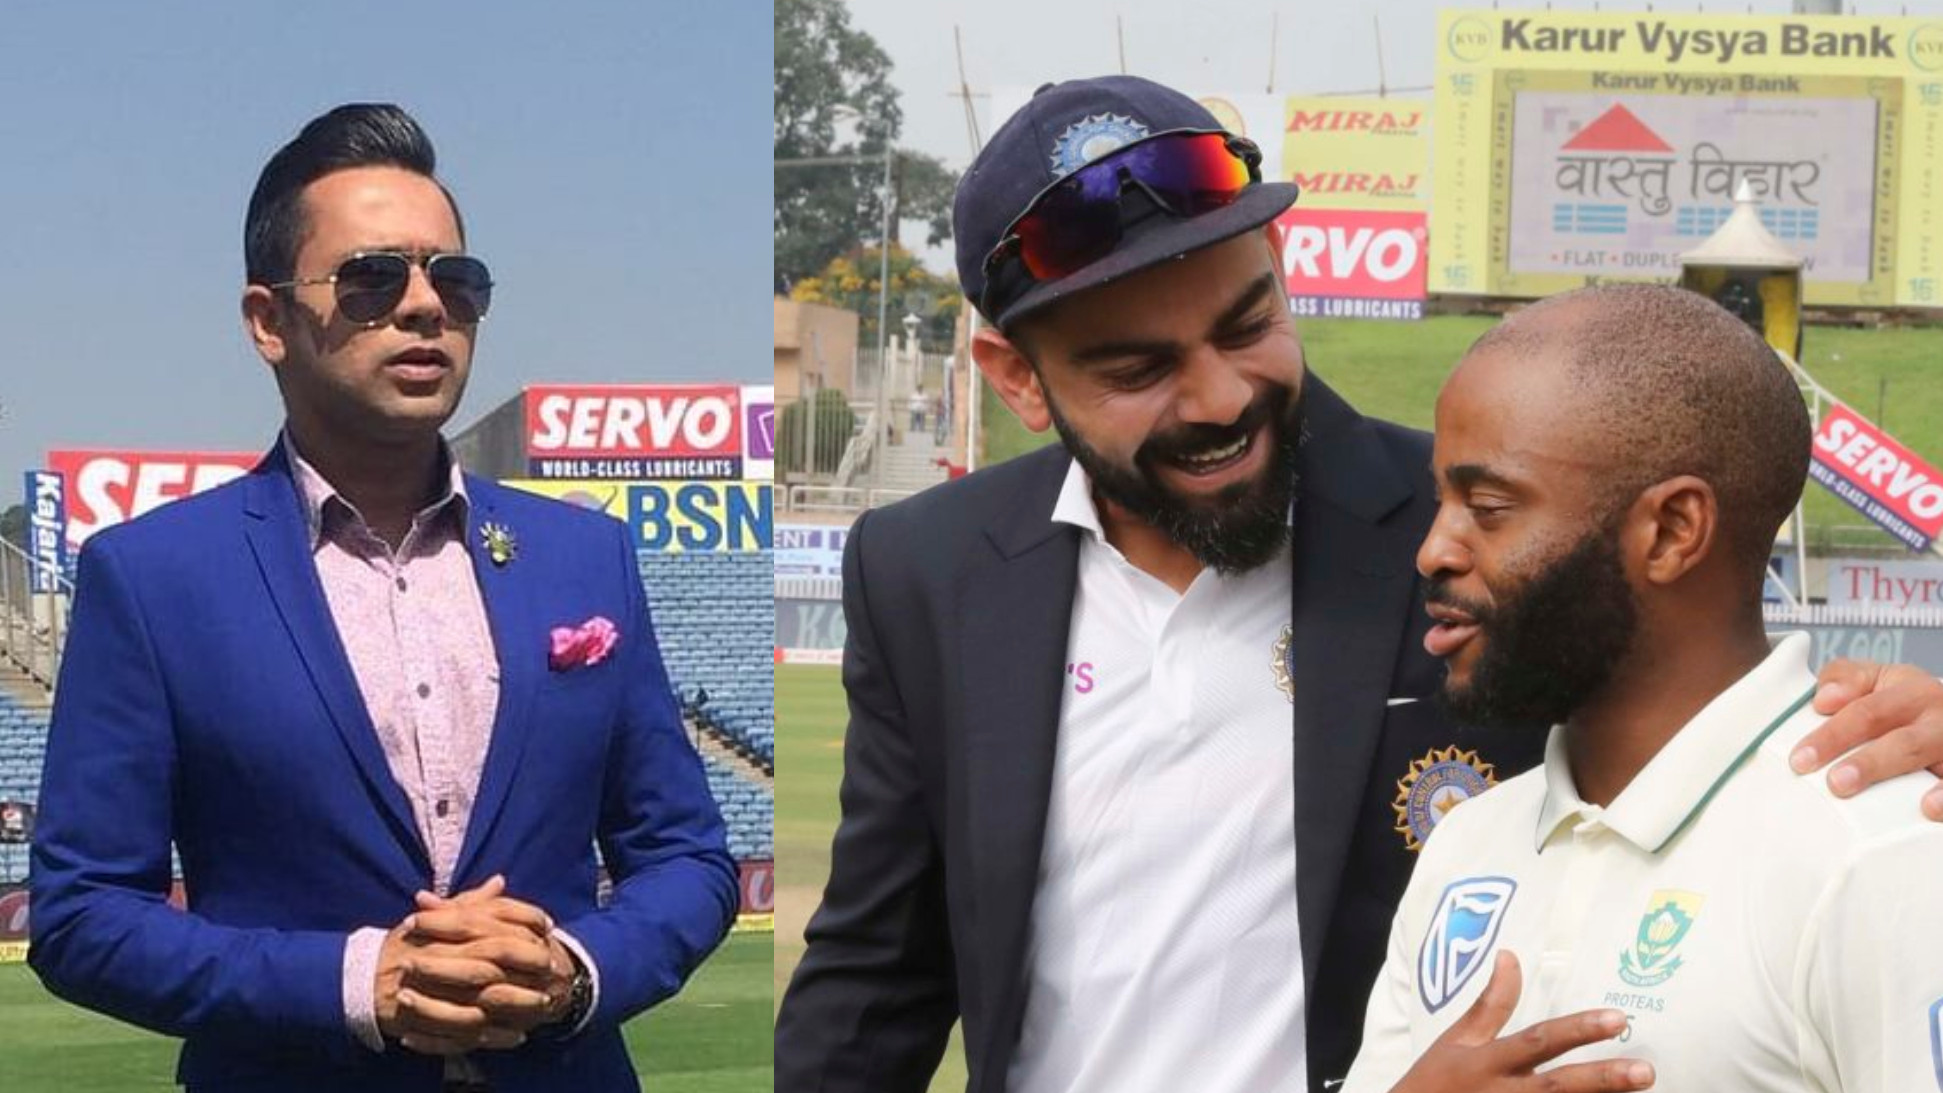 SA v IND 2021-22: India could’ve played T20Is instead of ODIs- Aakash Chopra slams scheduling of India tour